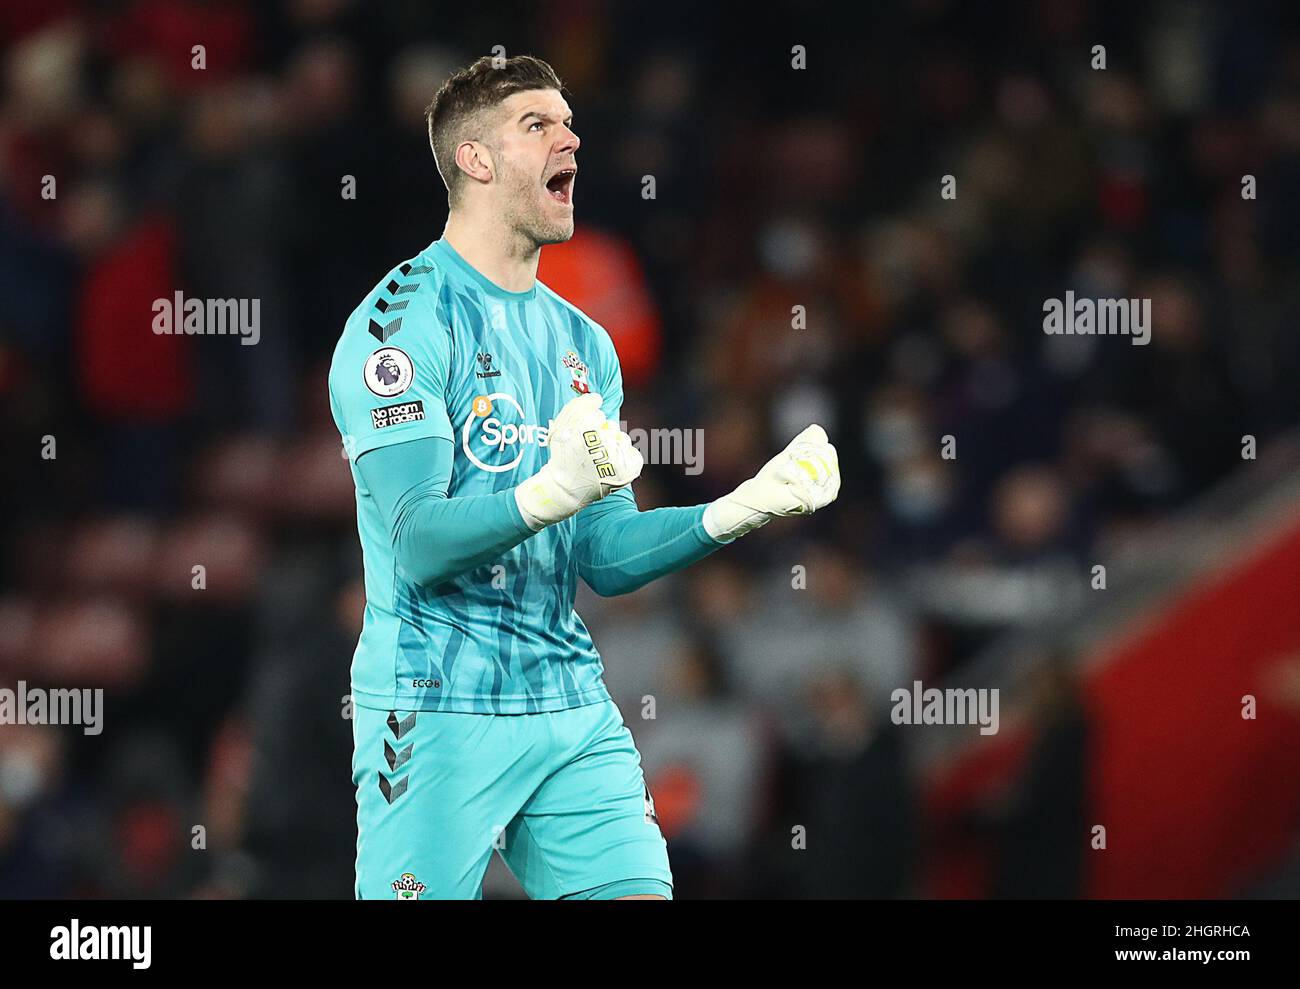 Southampton, England, 22nd January 2022. Fraser Forster of Southampton celebrates after Kyle Walker-Peters of Southampton scores the opening goal during the Premier League match at St Mary's Stadium, Southampton. Picture credit should read: Paul Terry / Sportimage Stock Photo